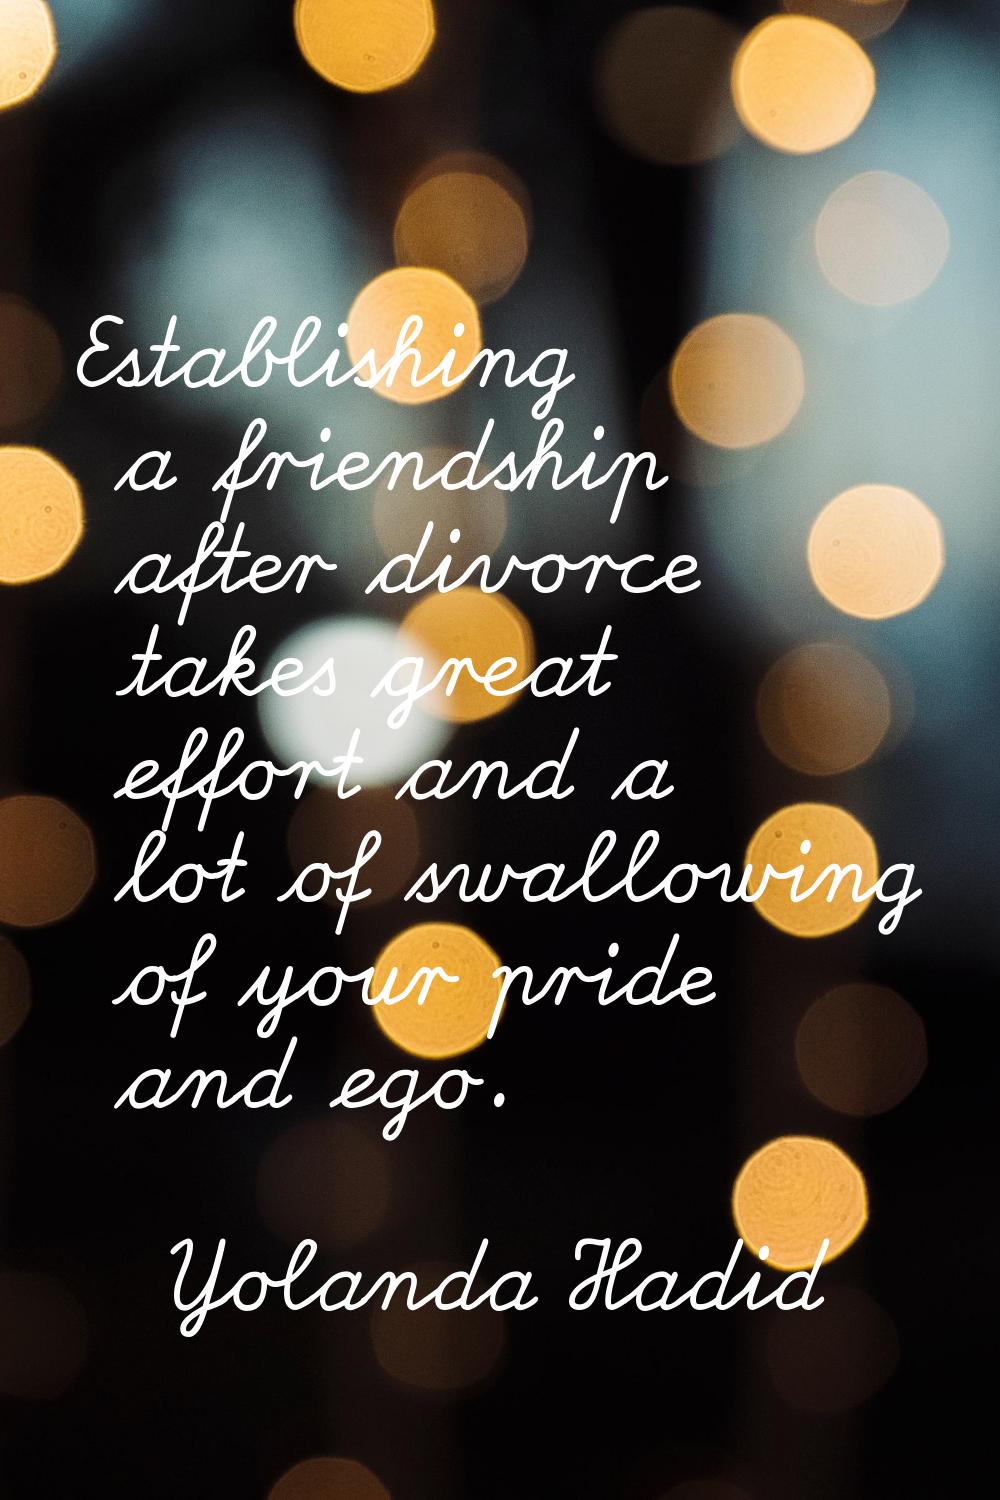 Establishing a friendship after divorce takes great effort and a lot of swallowing of your pride an